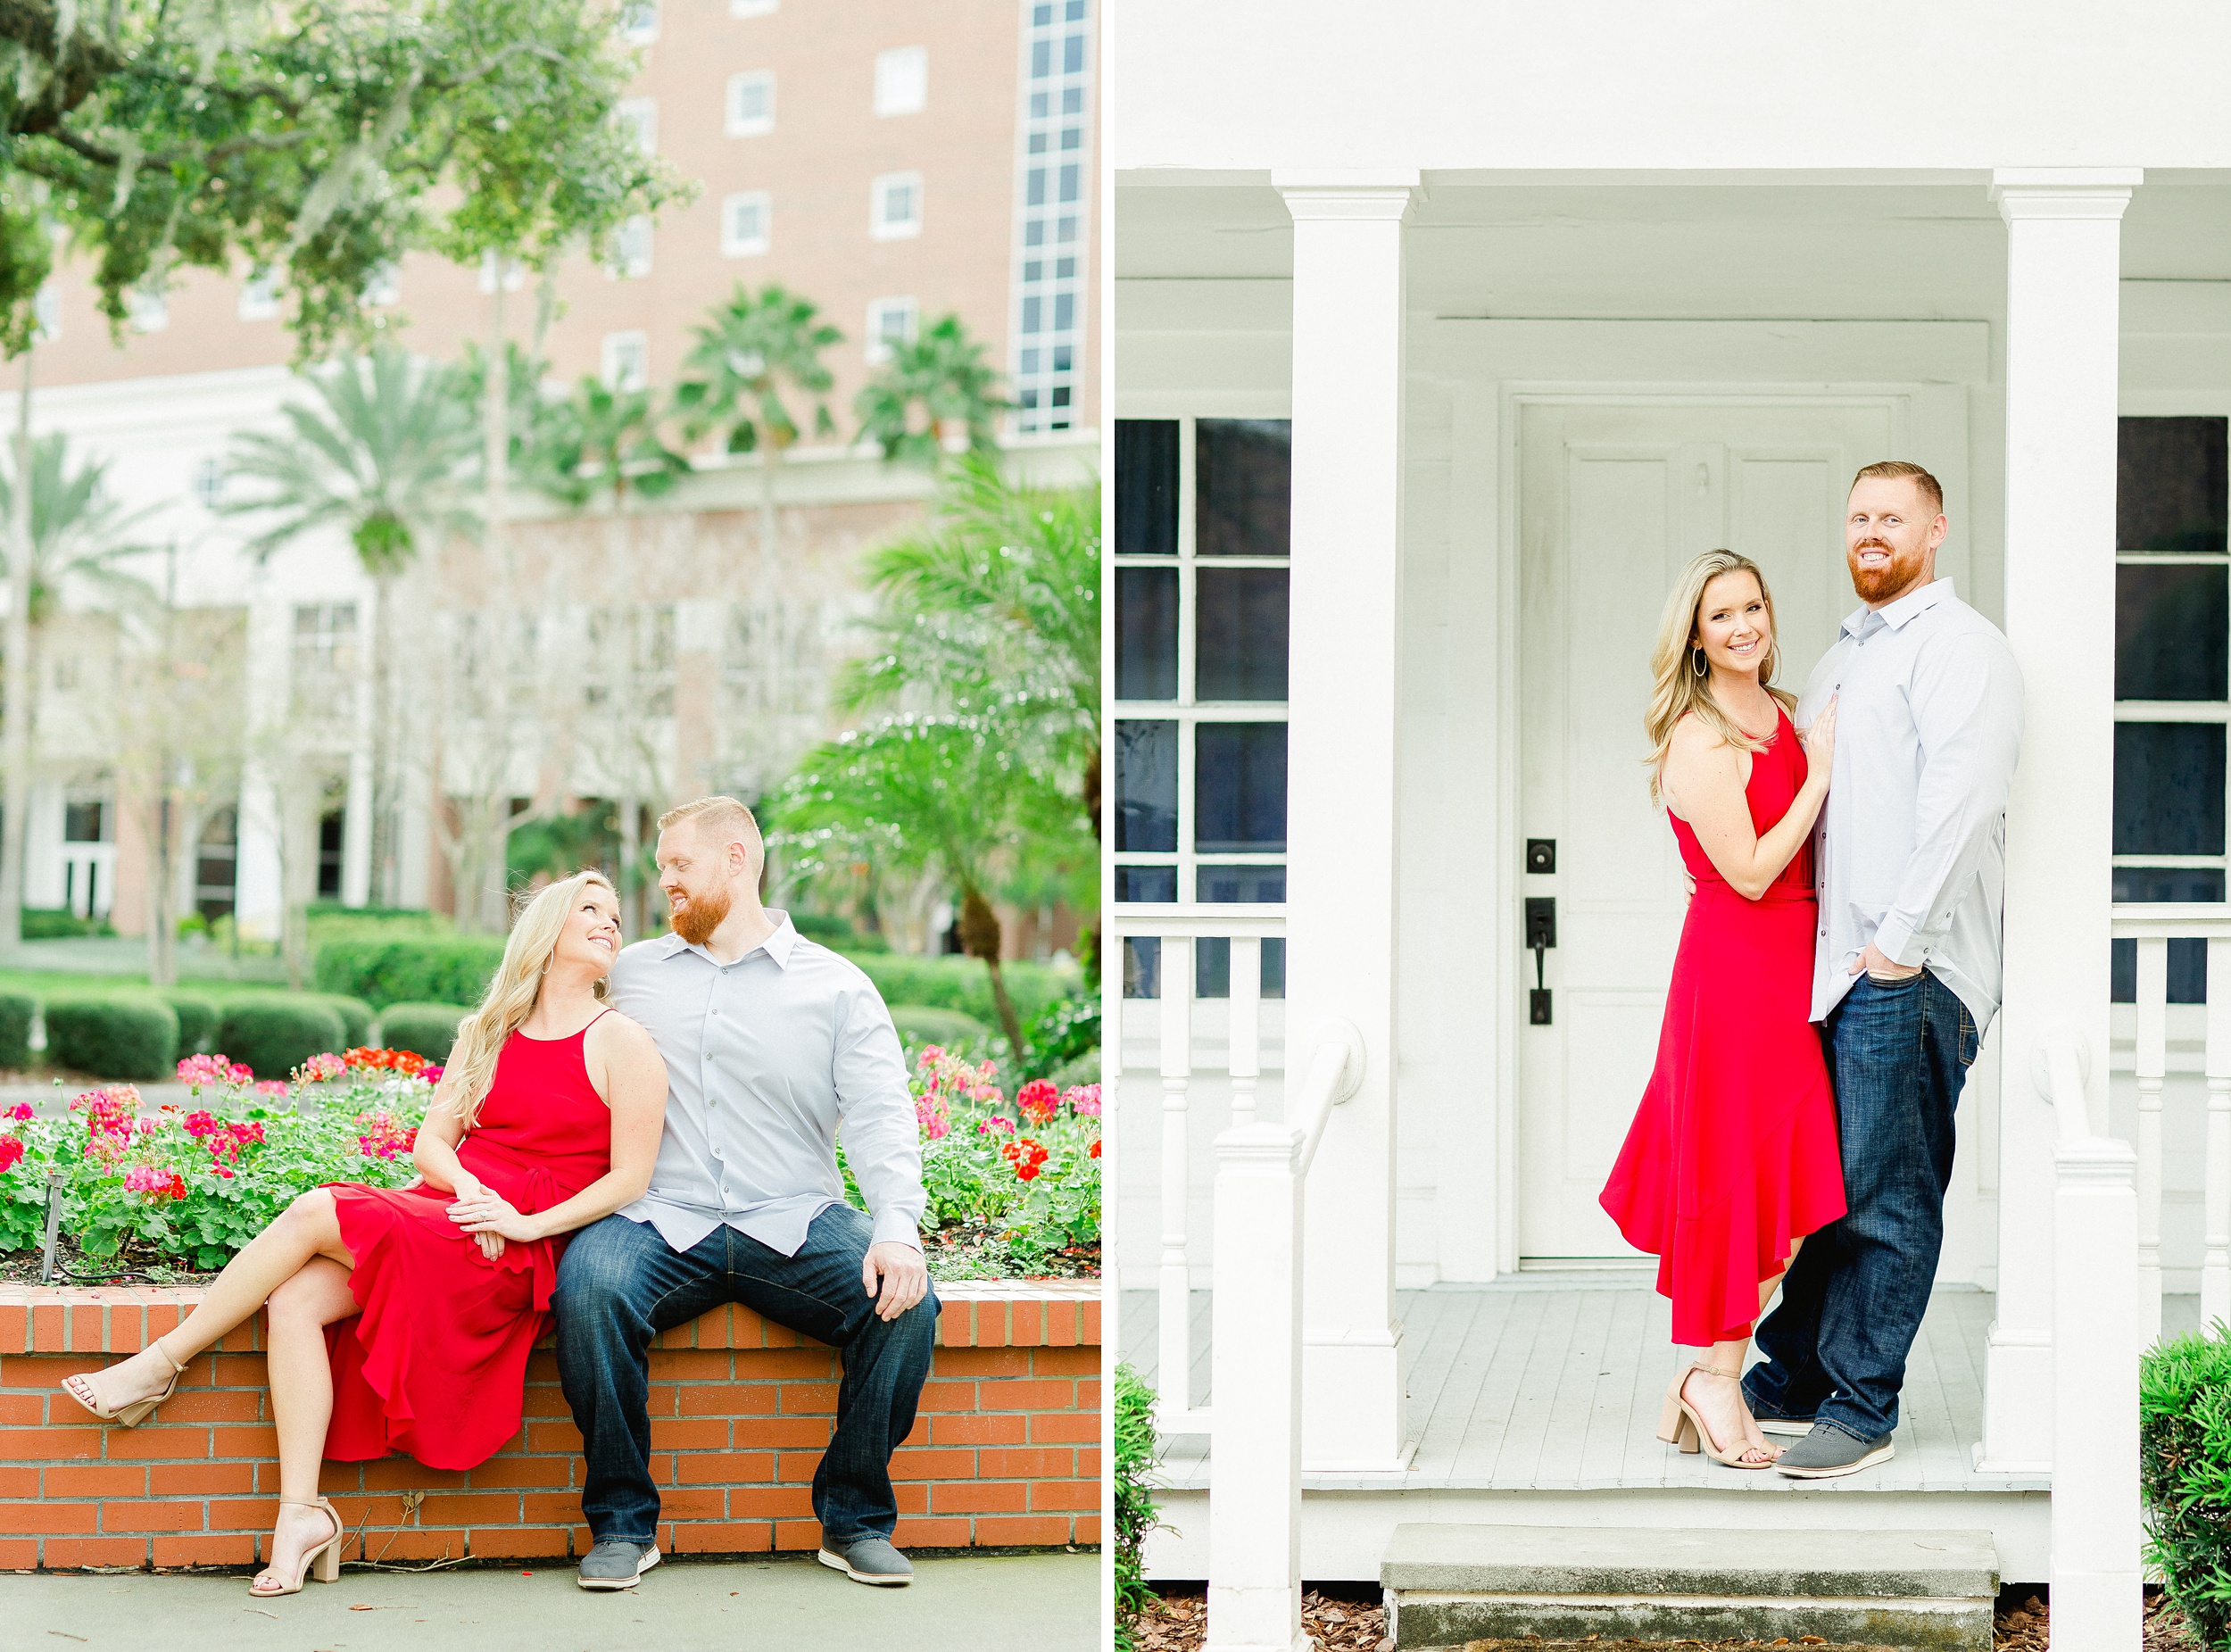 Tampa Engagement | © Ailyn La Torre Photography 2020